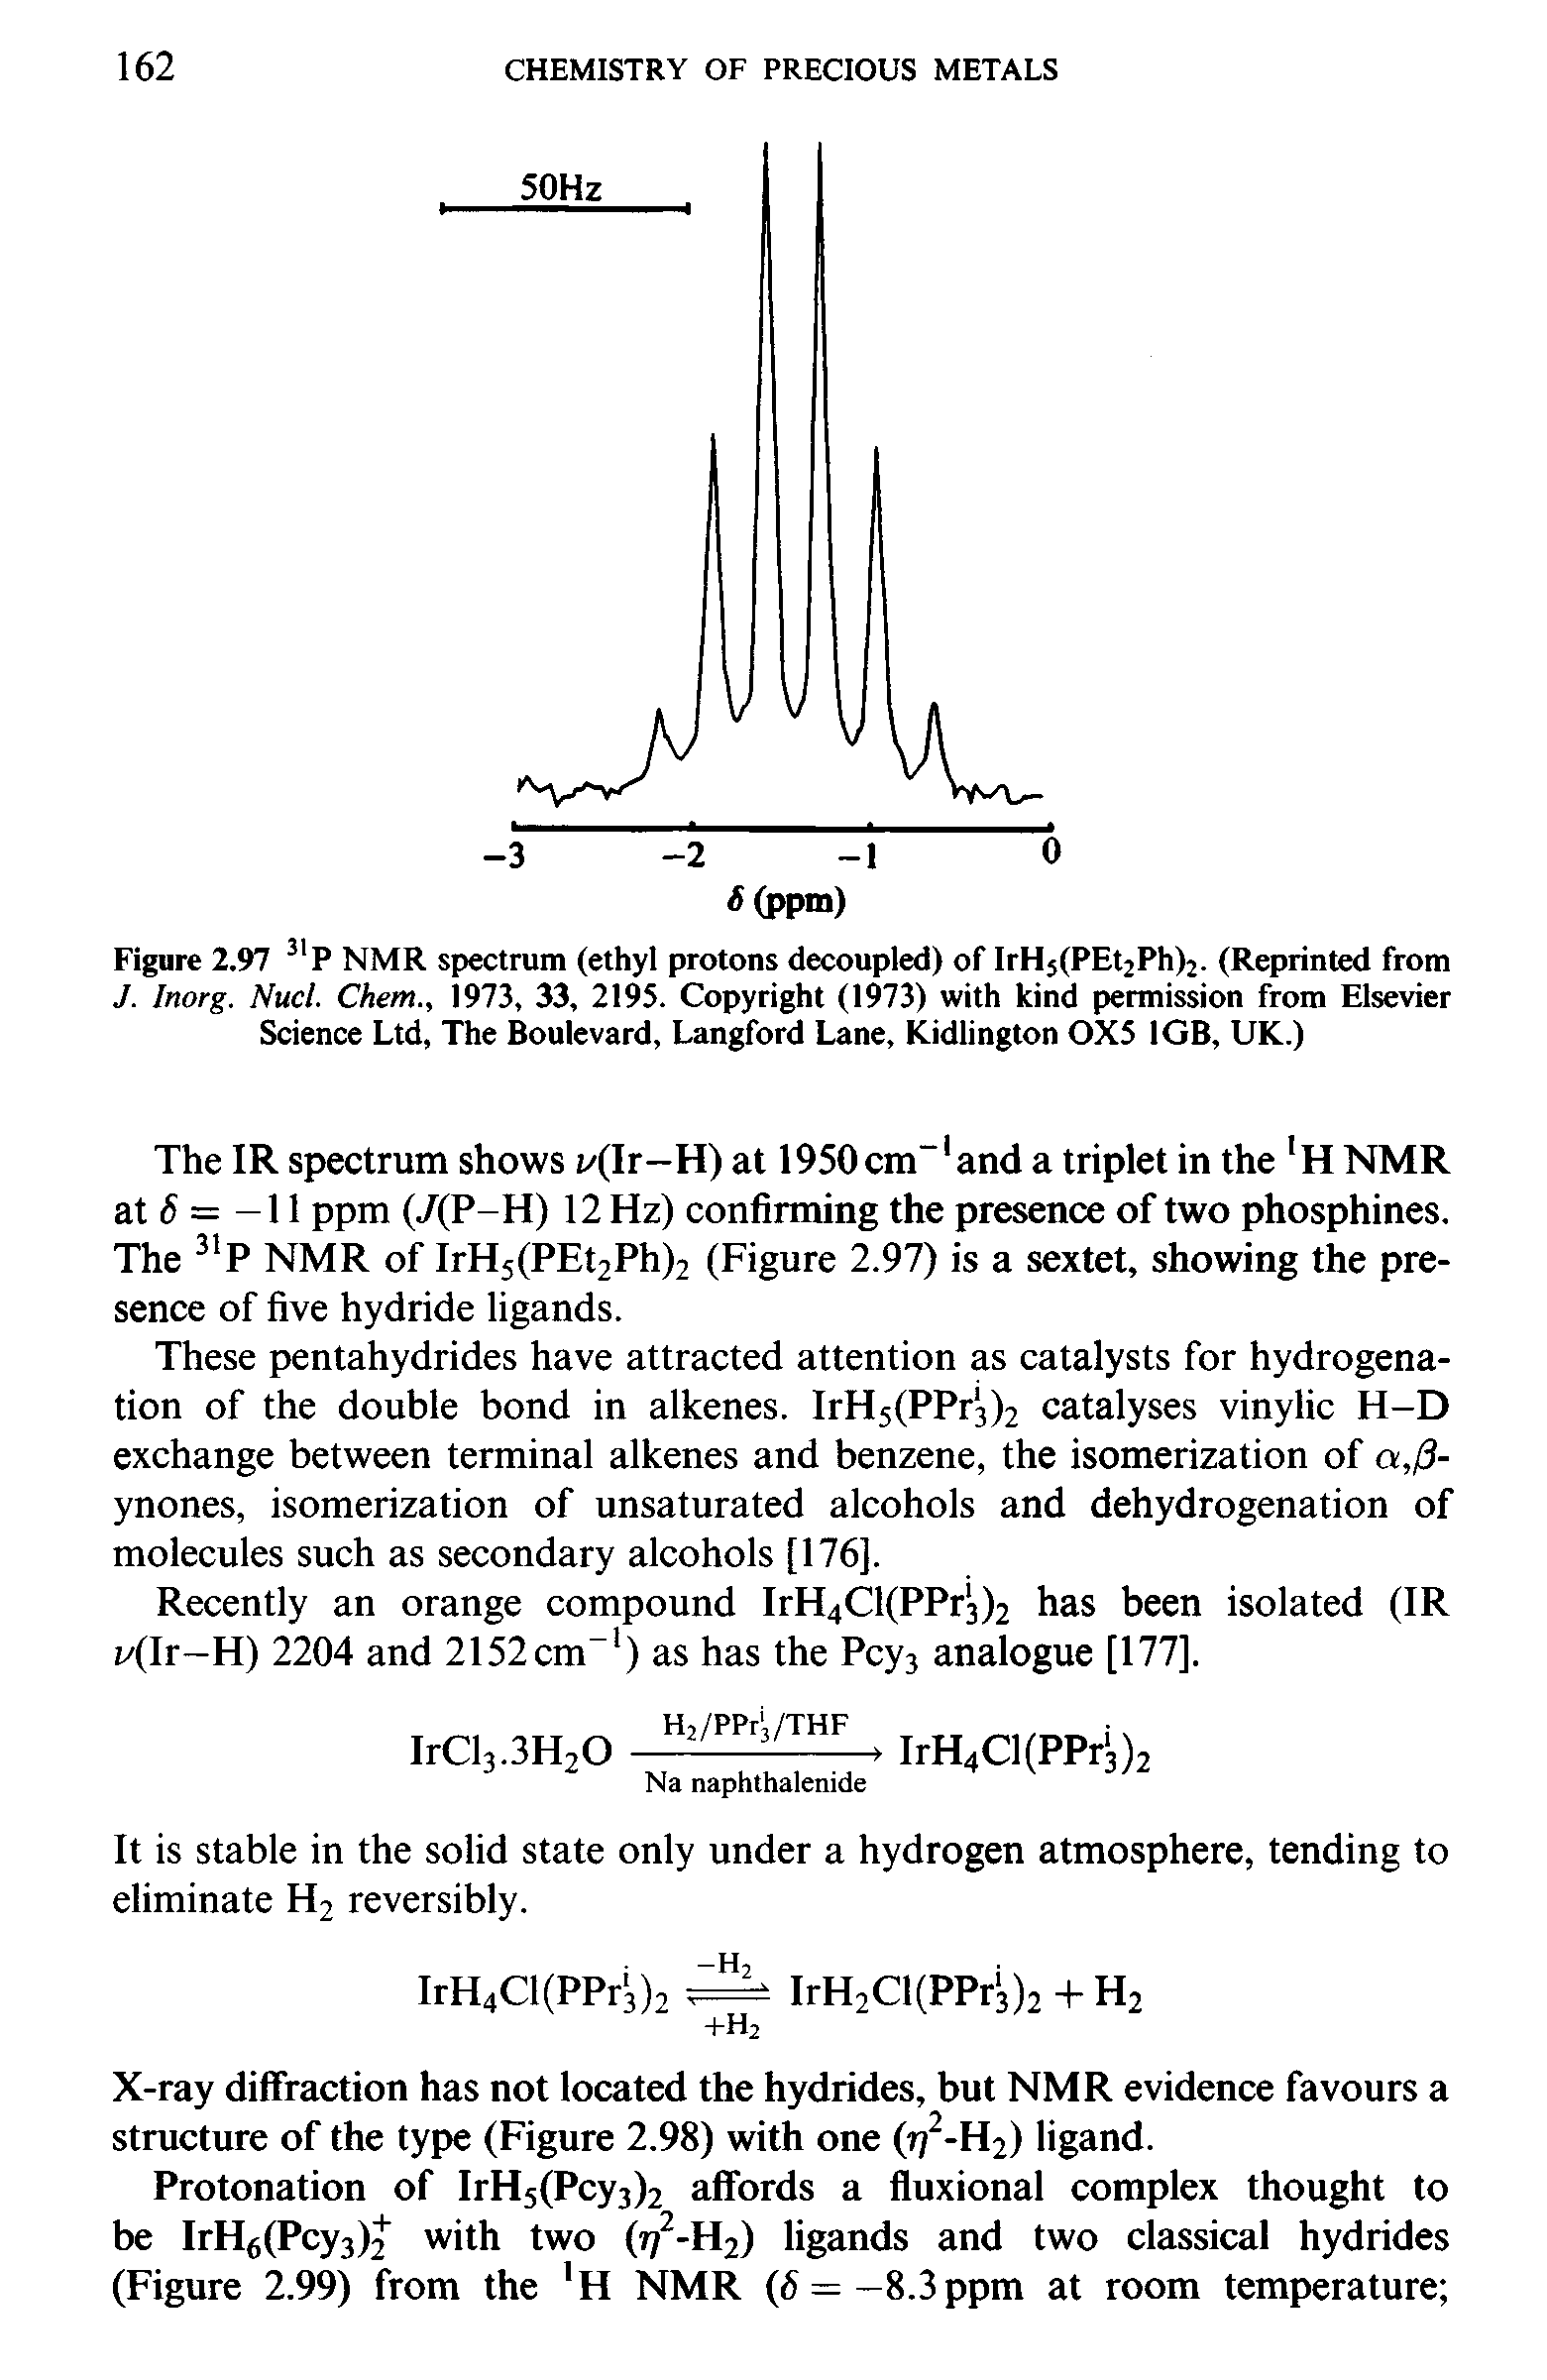 Figure 2.97 31P NMR spectrum (ethyl protons decoupled) of IrH5(PEt2Ph)2. (Reprinted from J. Inorg. Nucl. Chem., 1973, 33, 2195. Copyright (1973) with kind permission from Elsevier Science Ltd, The Boulevard, Langford Lane, Kidlington 0X5 1GB, UK.)...